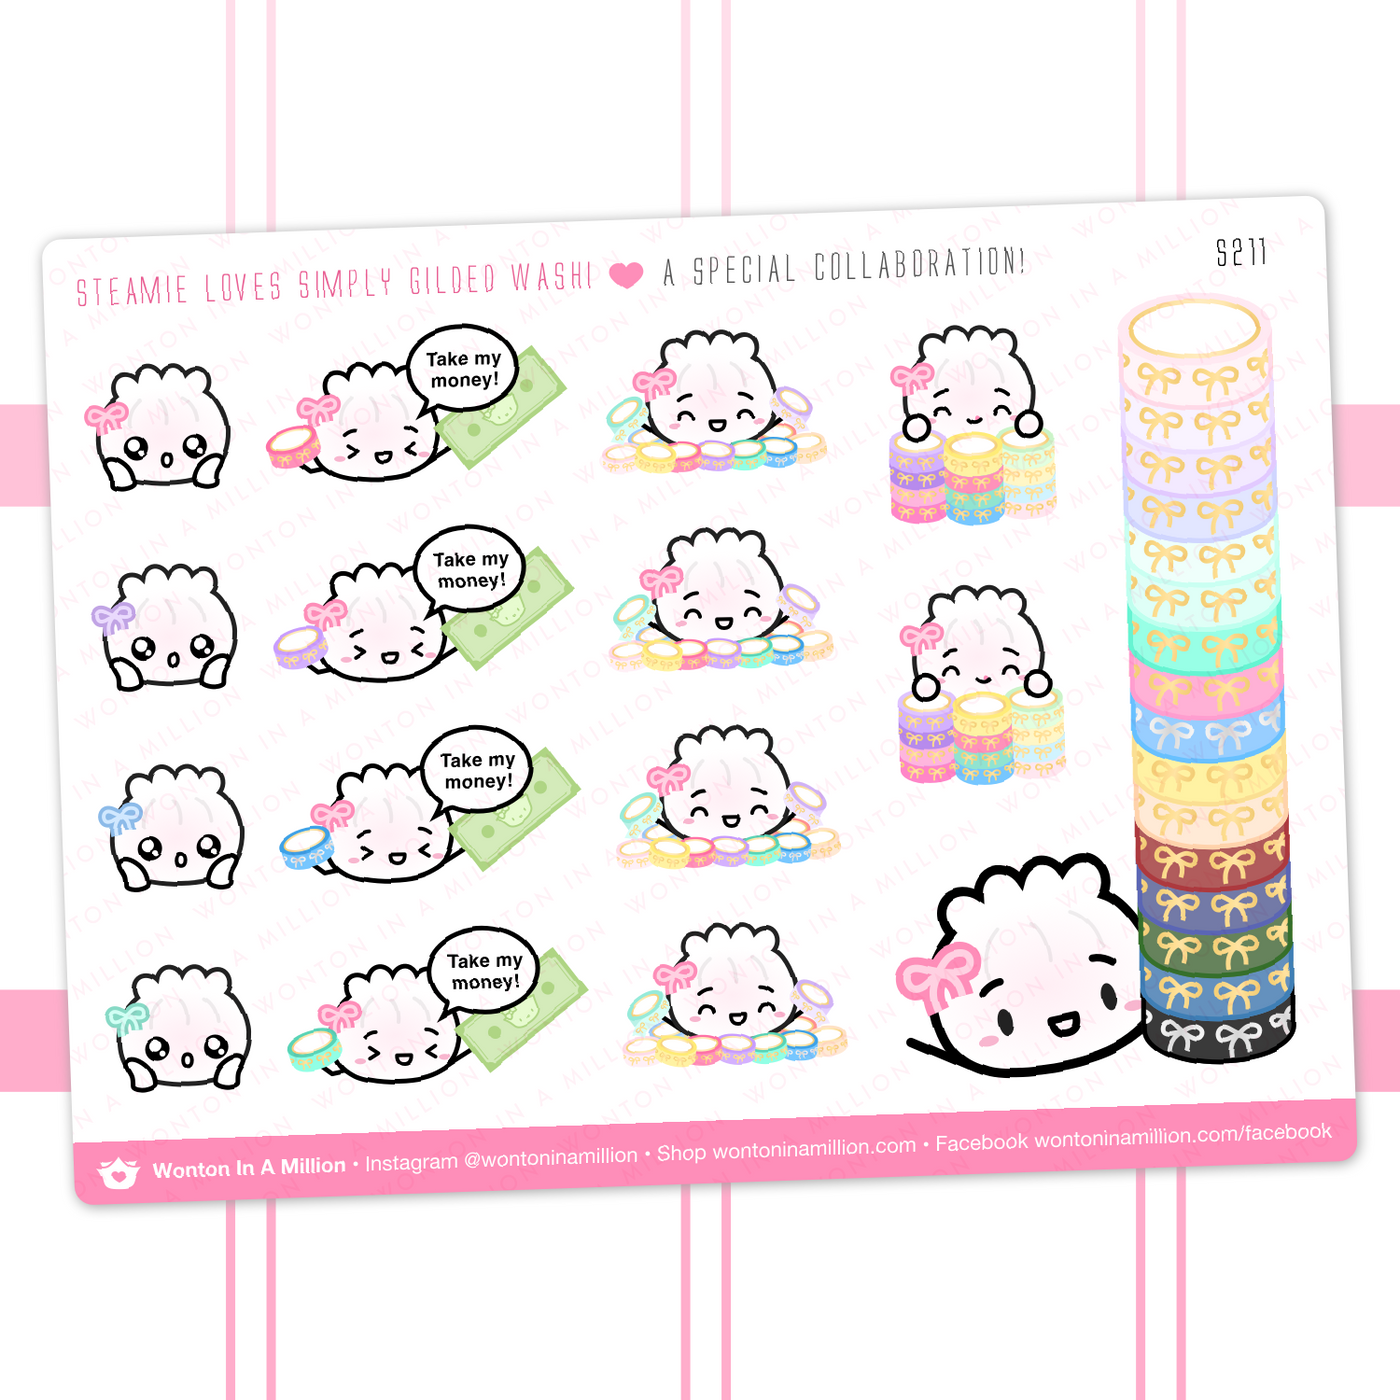 S211 | Steamie Loves Simply Gilded Washi Stickers